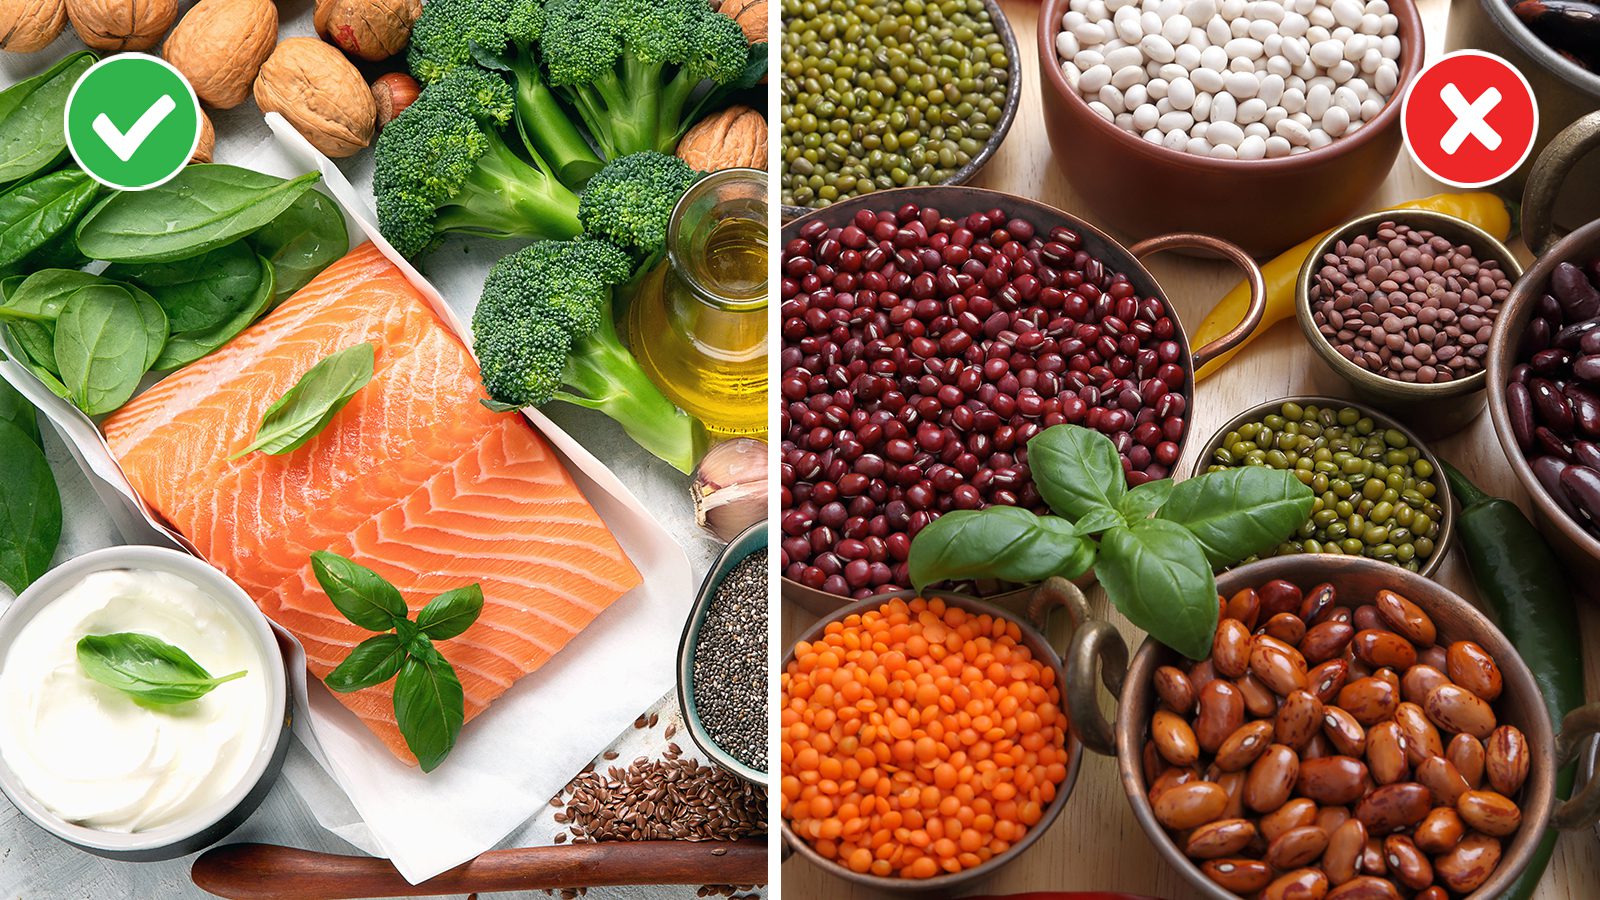 7 Reasons to Try the Autoimmune Protocol Diet (and How)